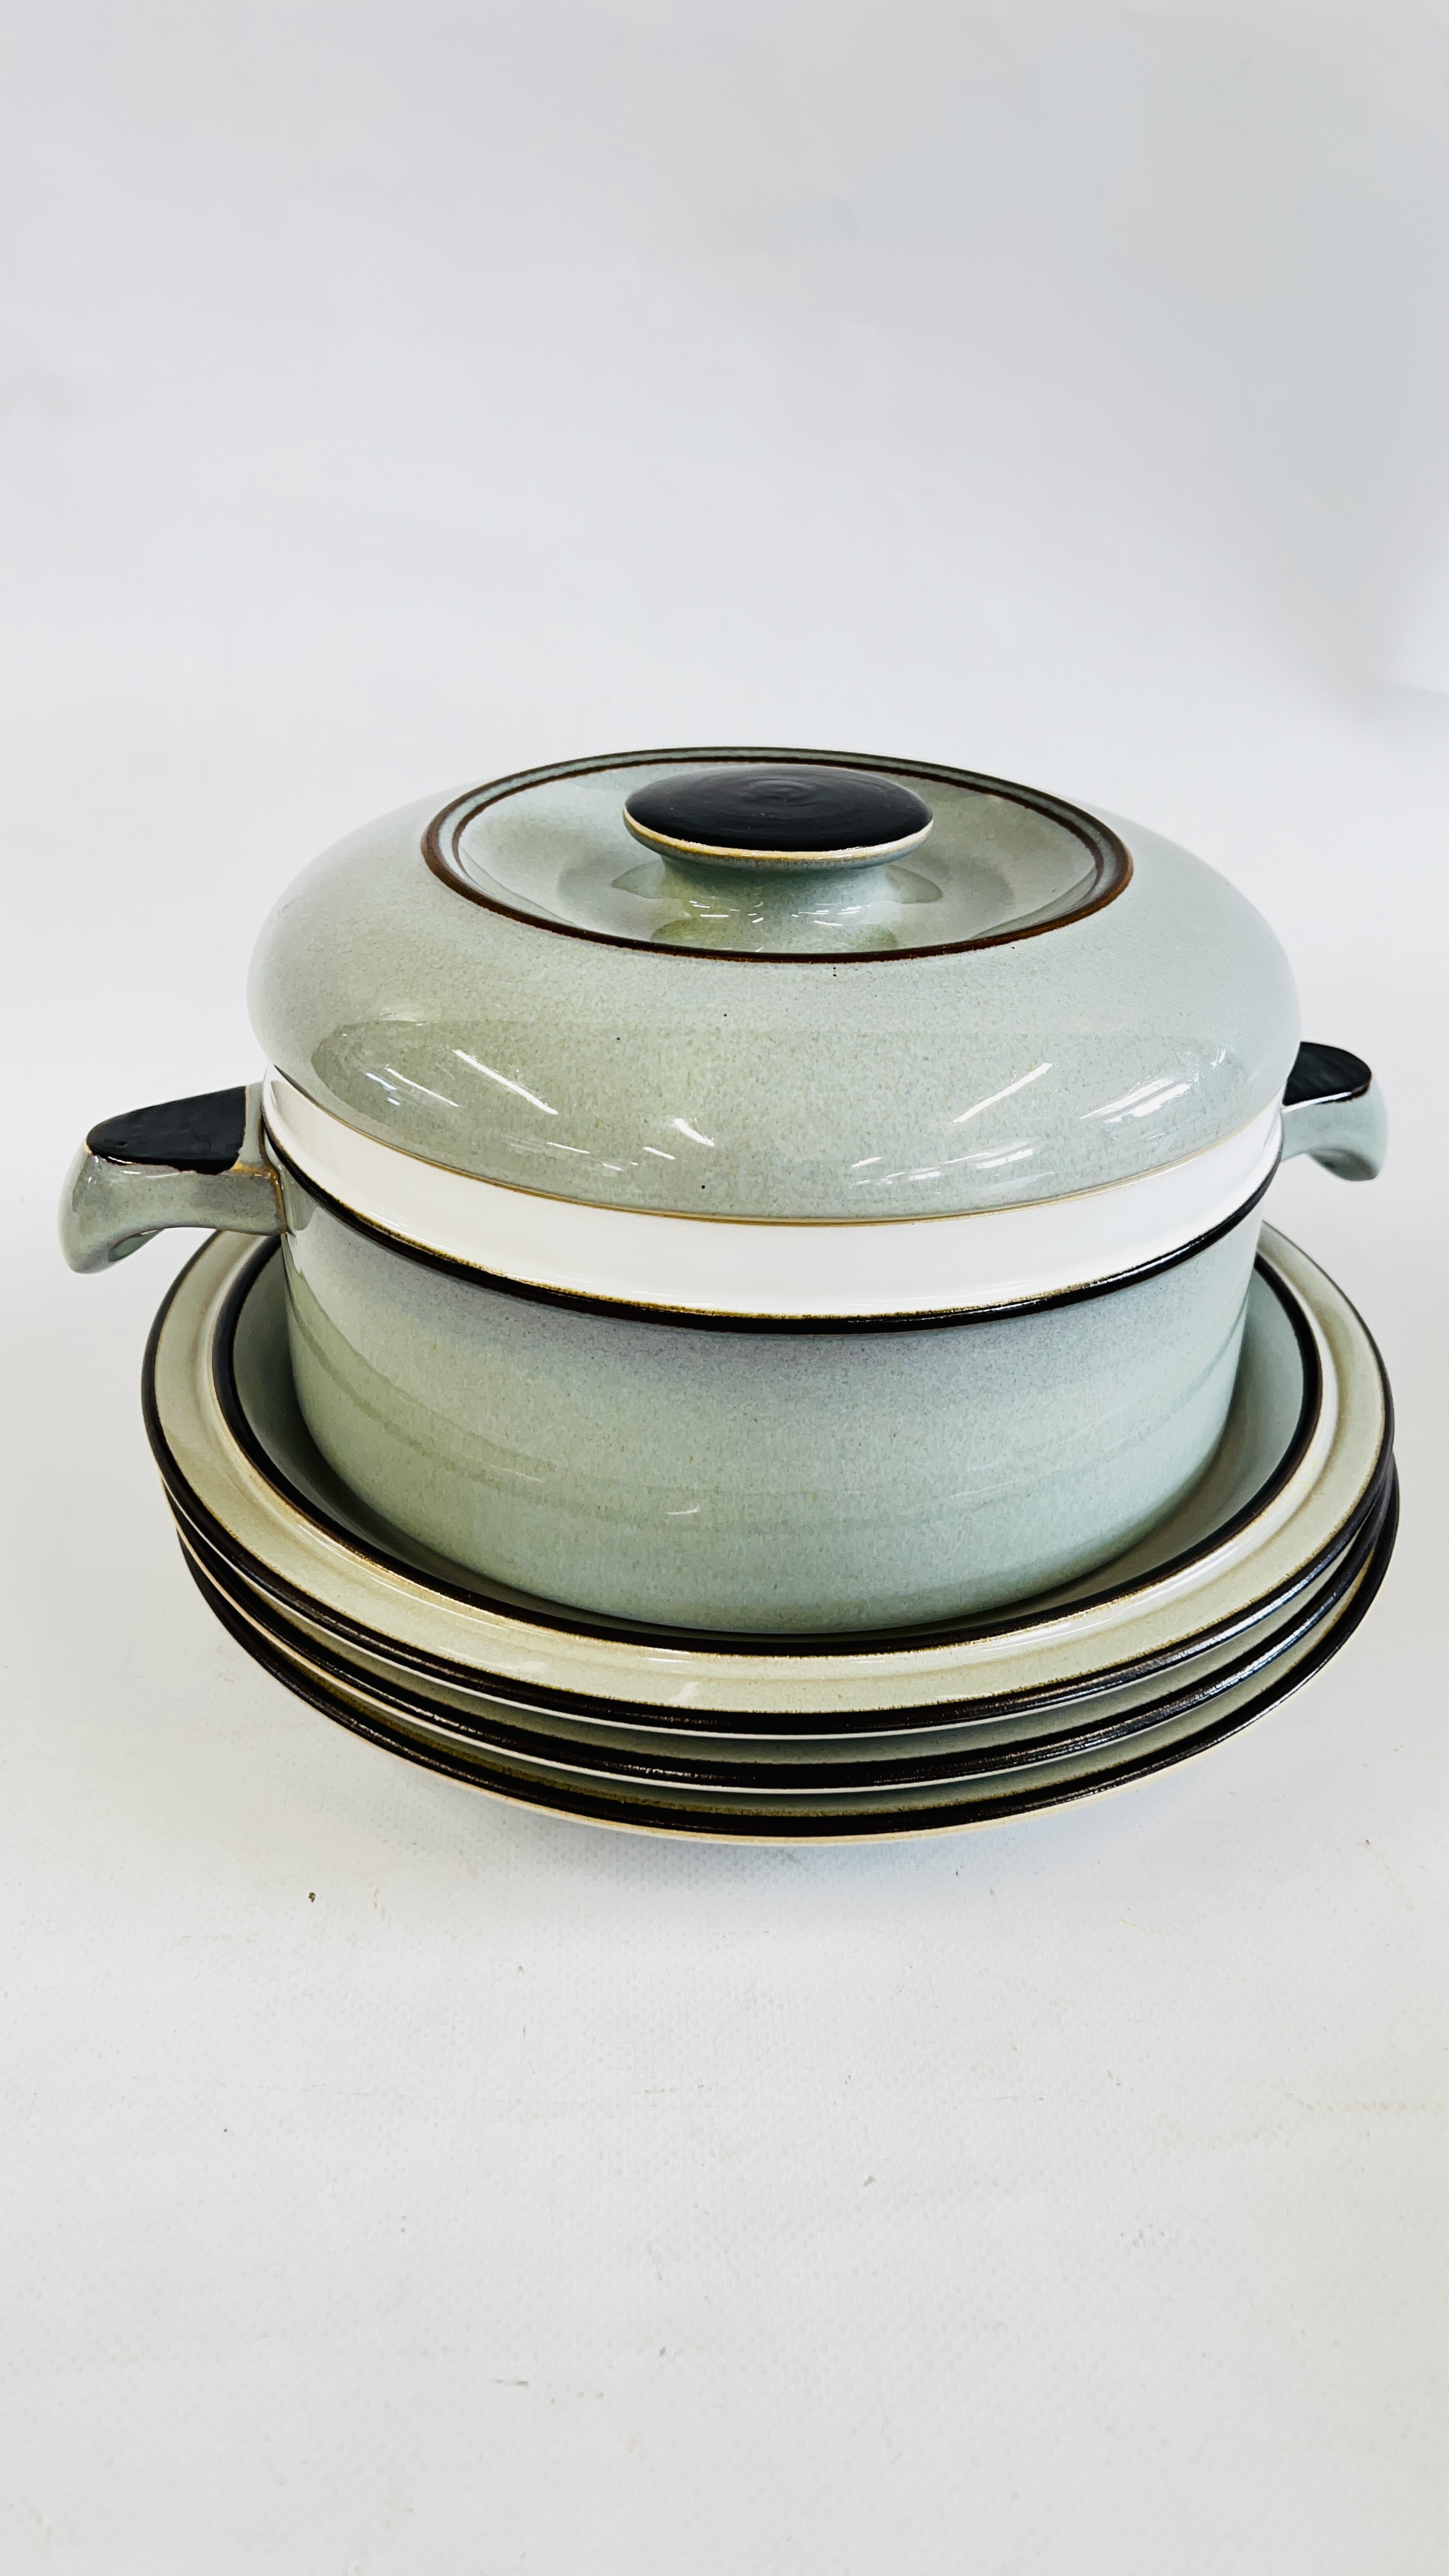 A QUANTITY OF DENBY "ROMANCE" DINNERWARE APPROX 23 PIECES (OVAL PLATE A/F) ALONG WITH A FURTHER 18 - Image 6 of 6